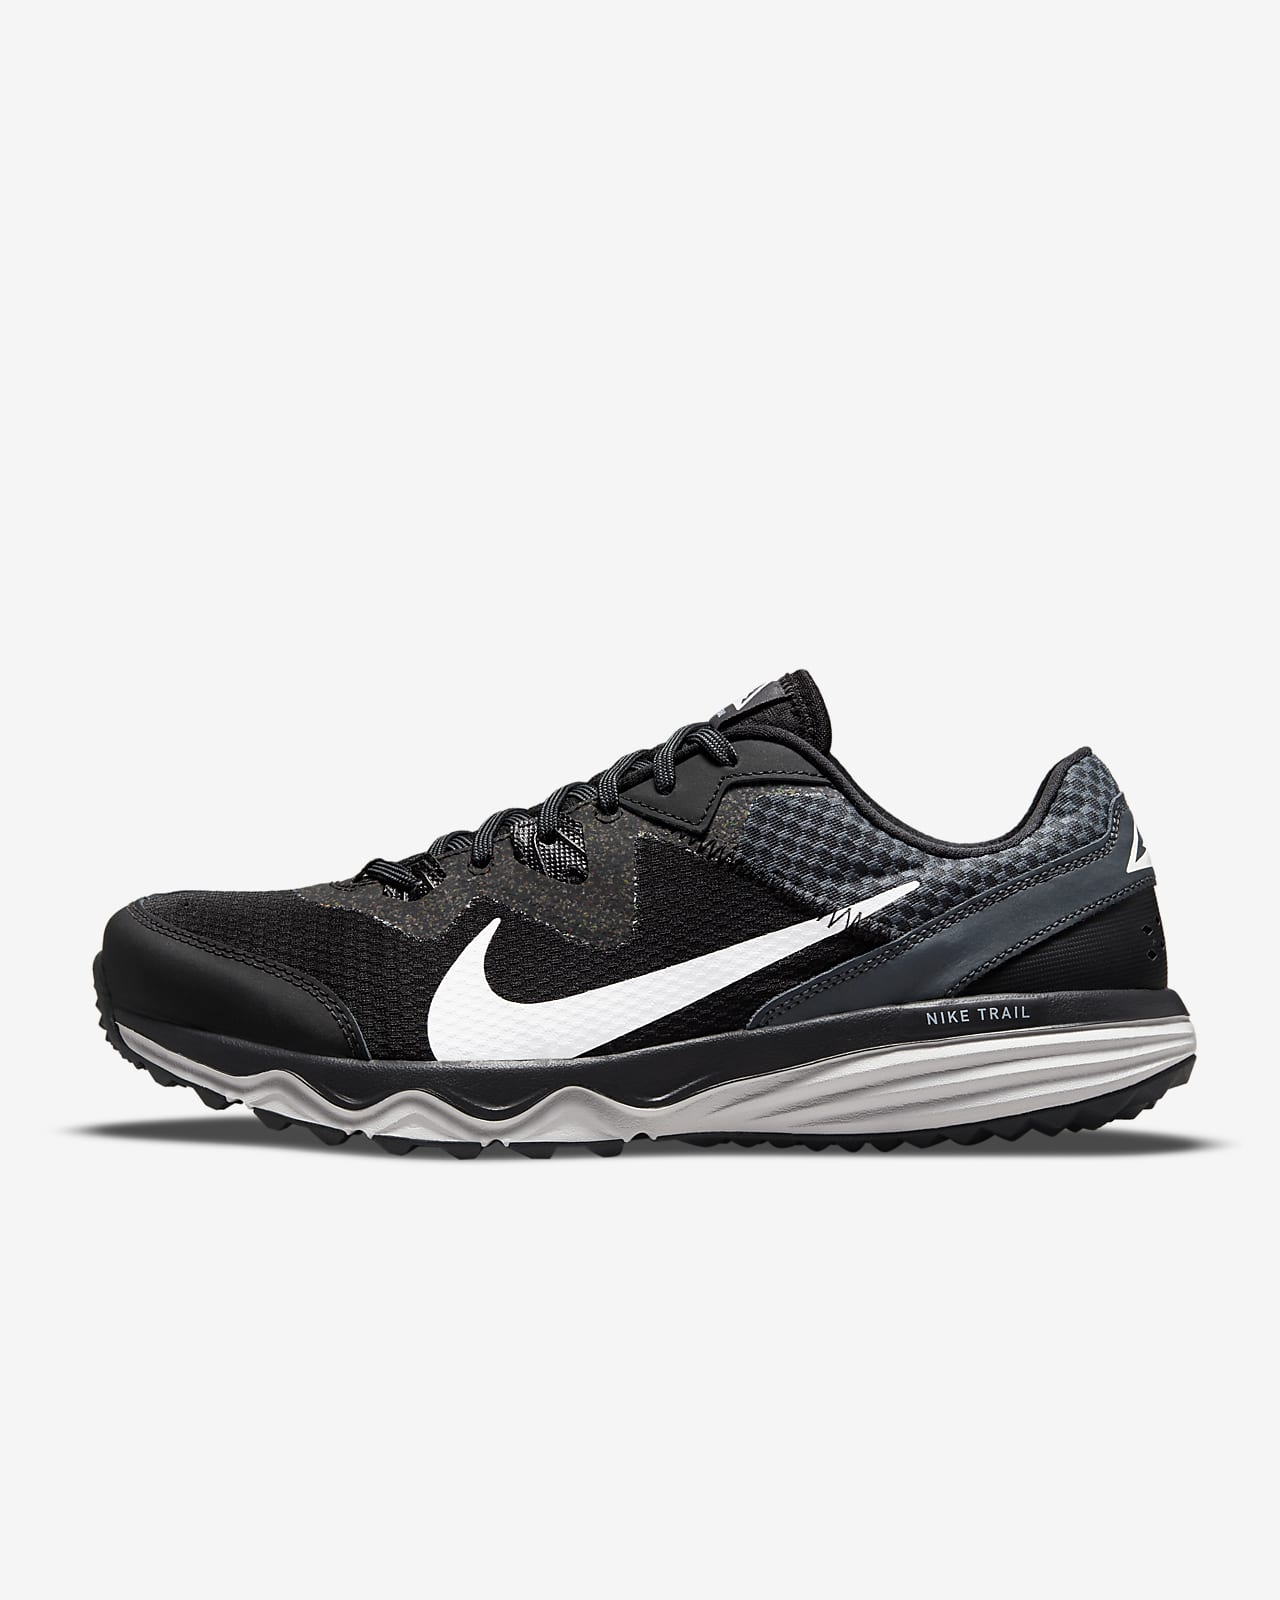 nike trail running shoes canada